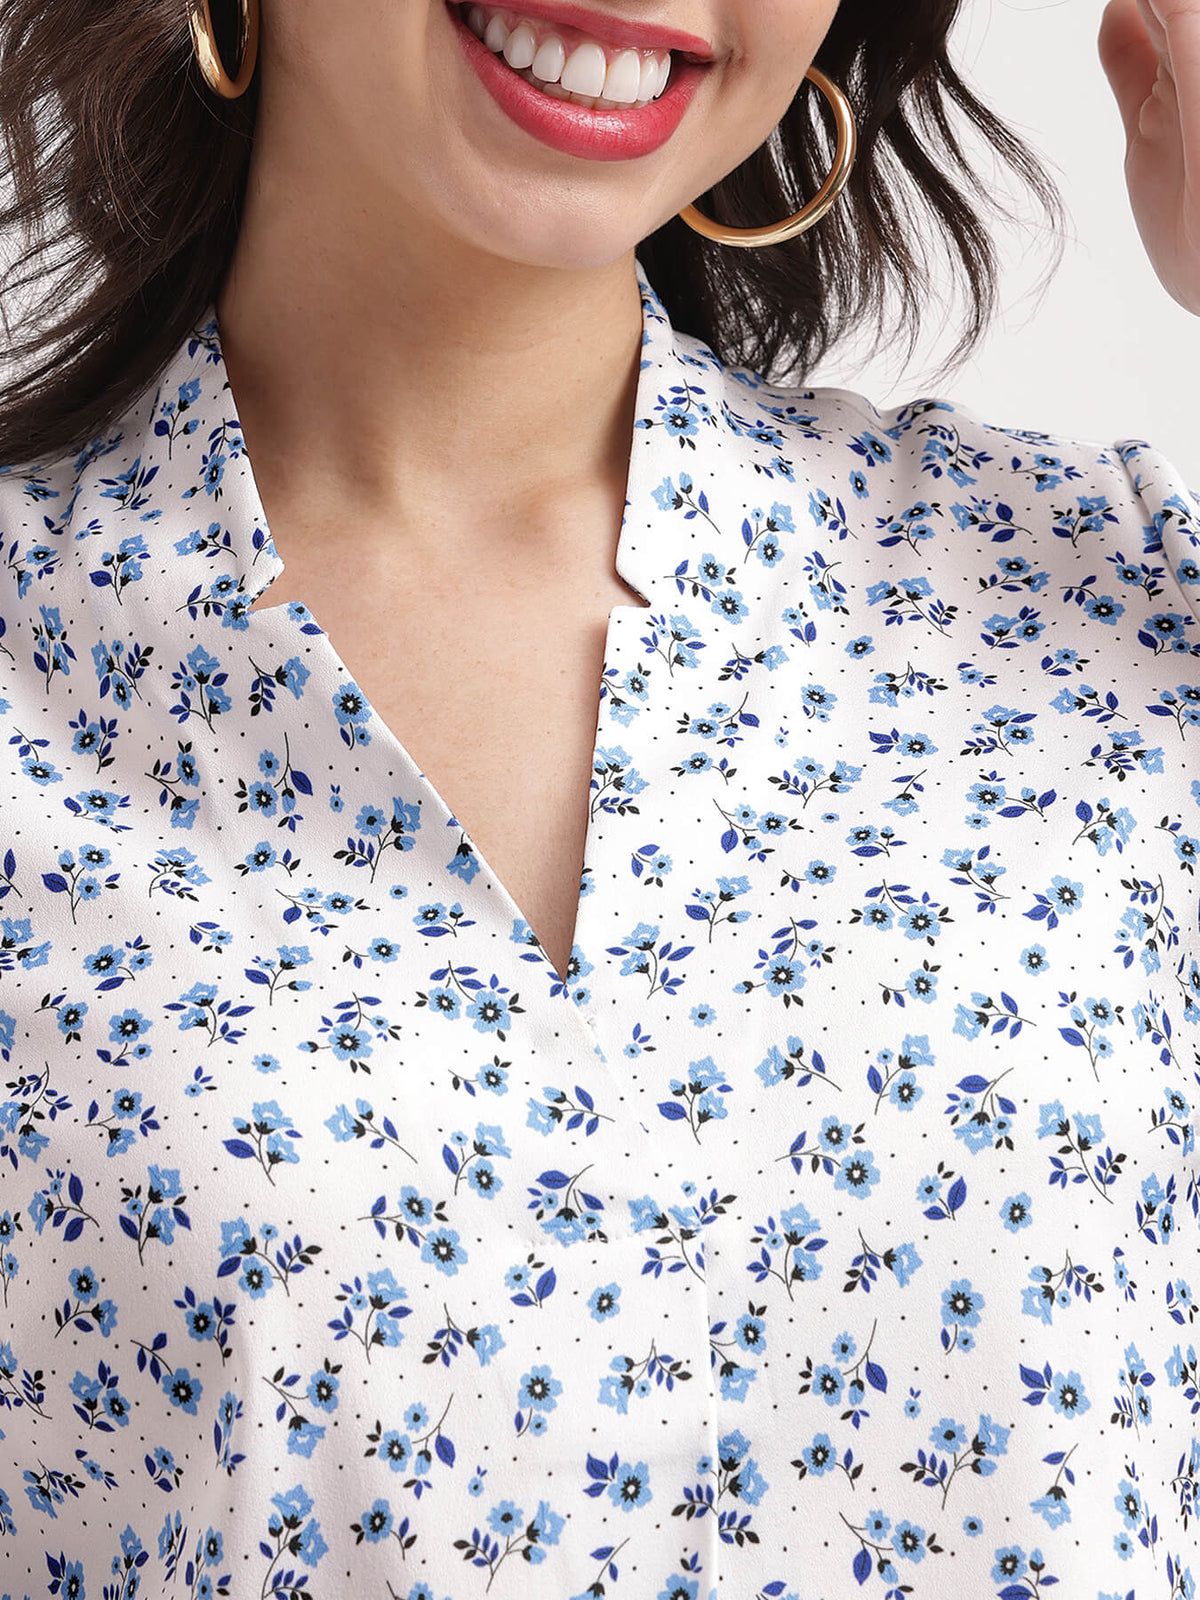 Floral Print Top - White And Blue